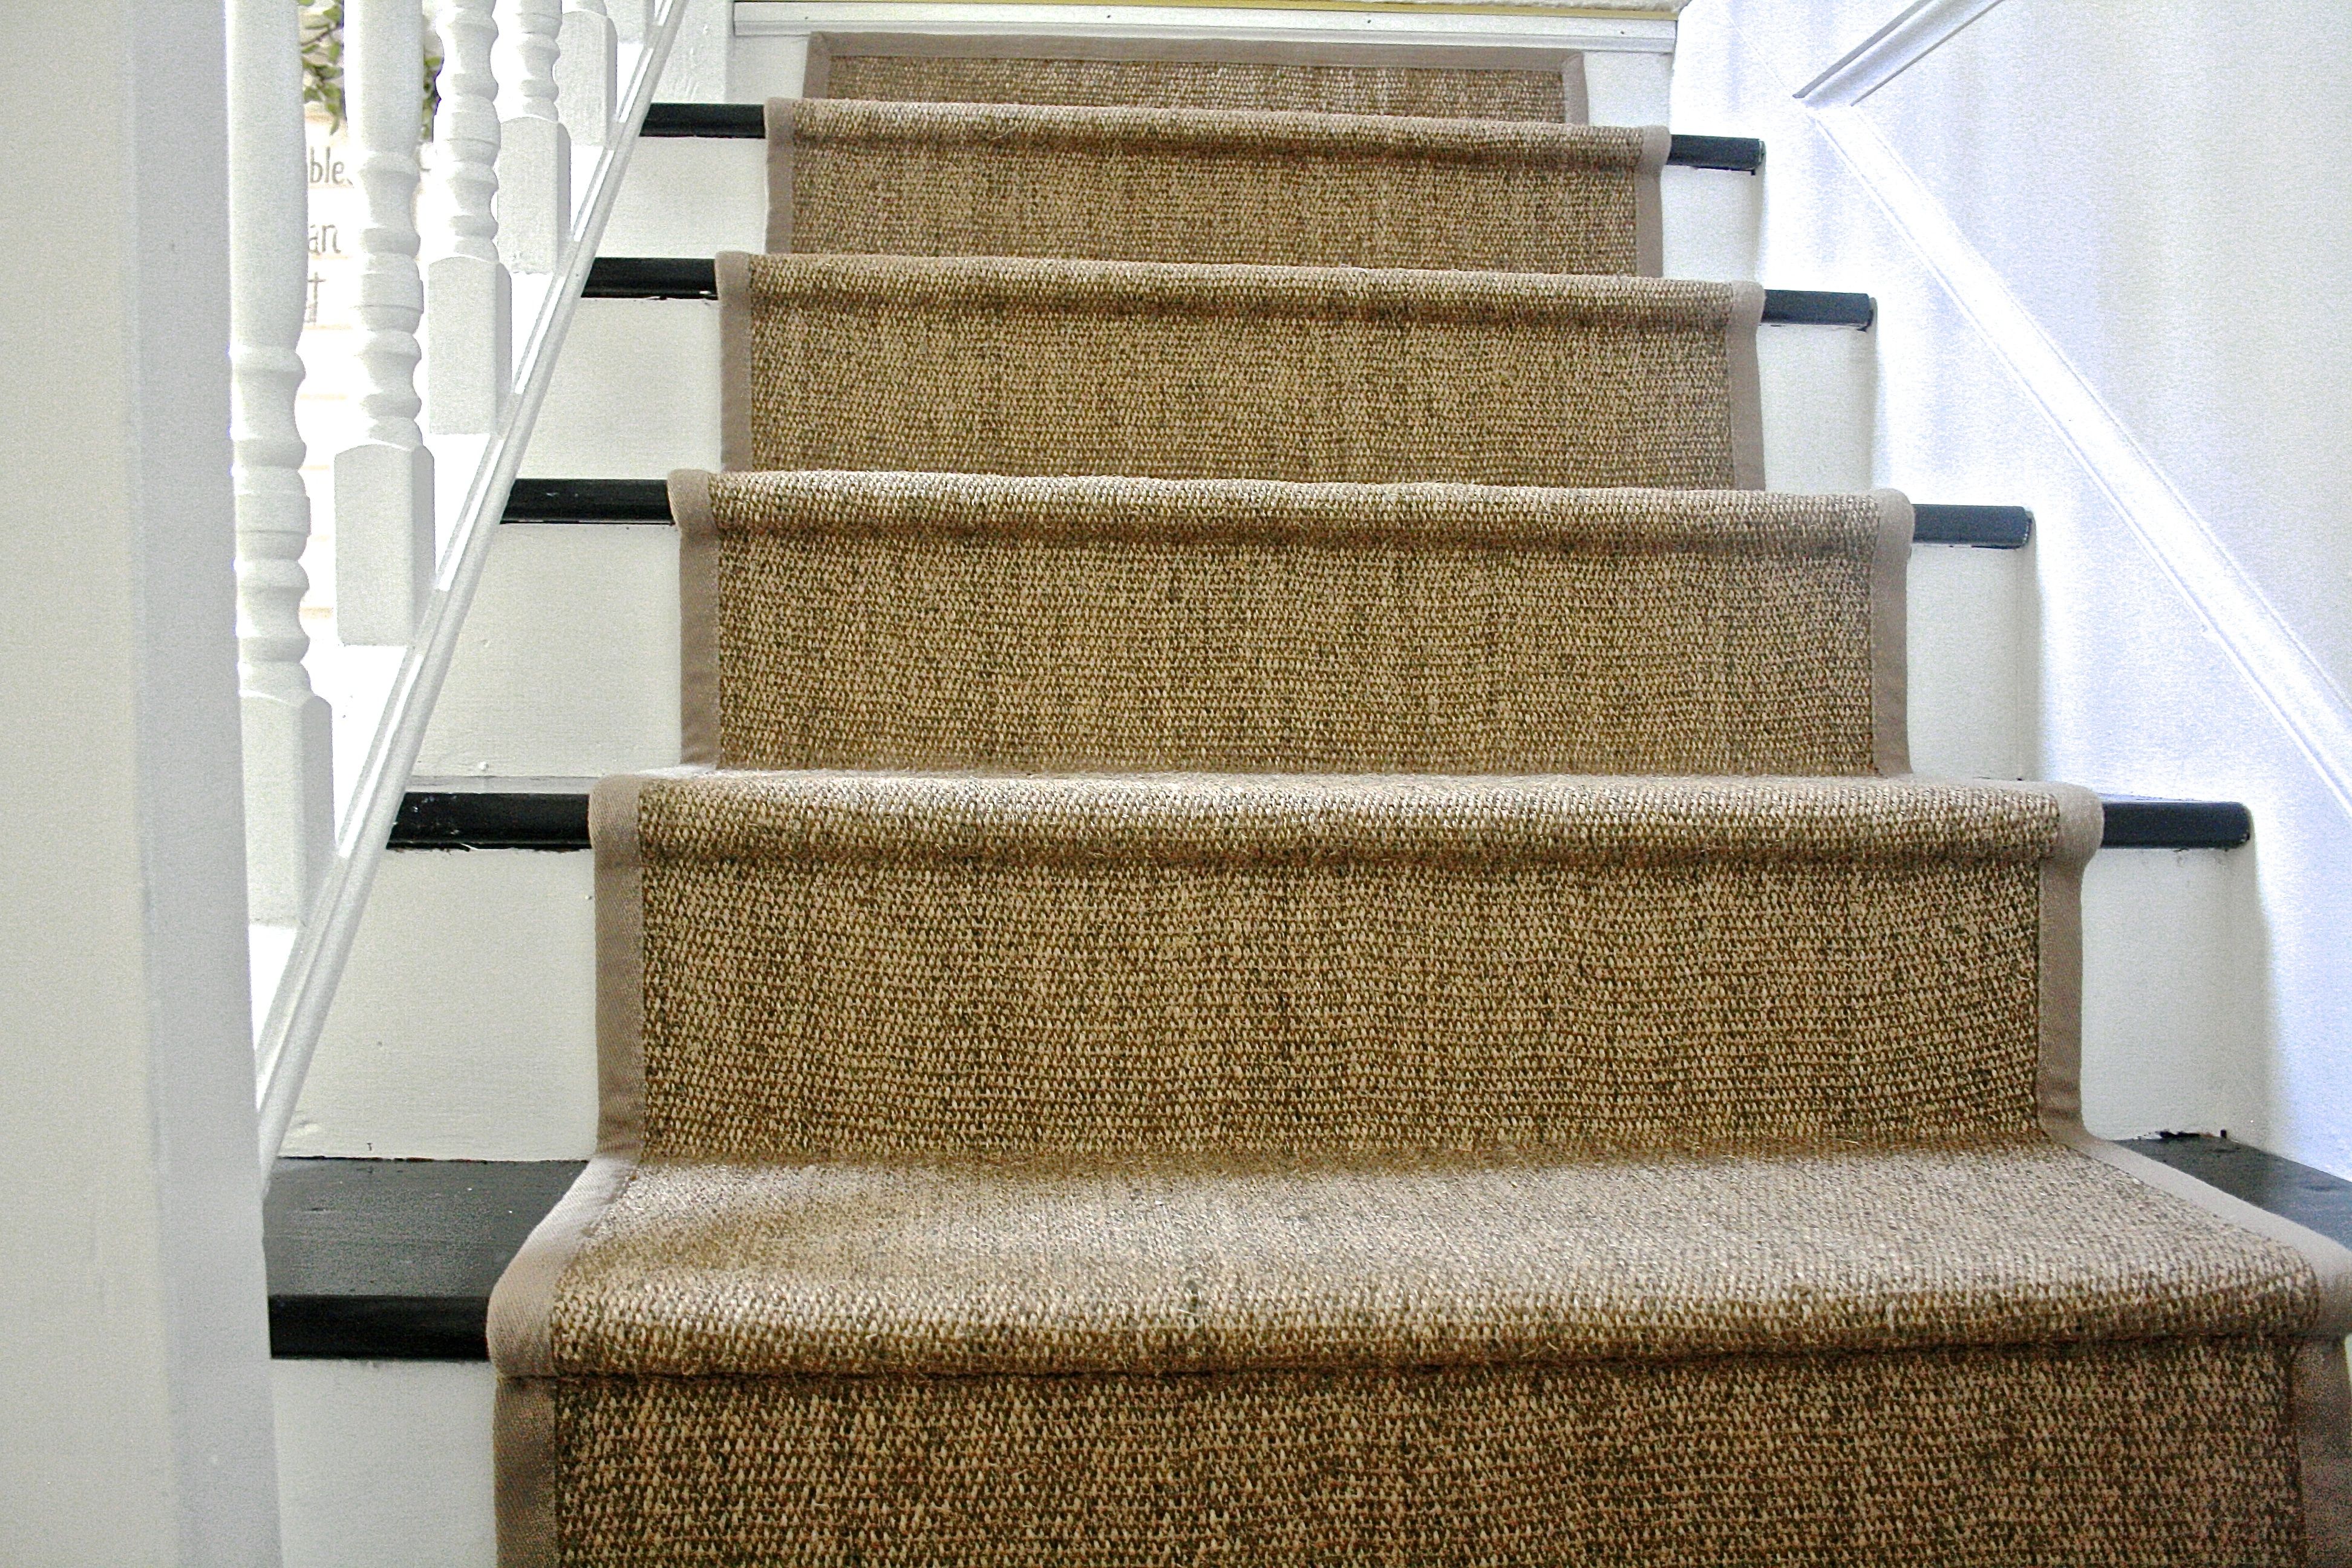 Diy Ikea Jute Rug Stair Runner What Emily Does Intended For Hallway Runners Ikea (View 8 of 20)